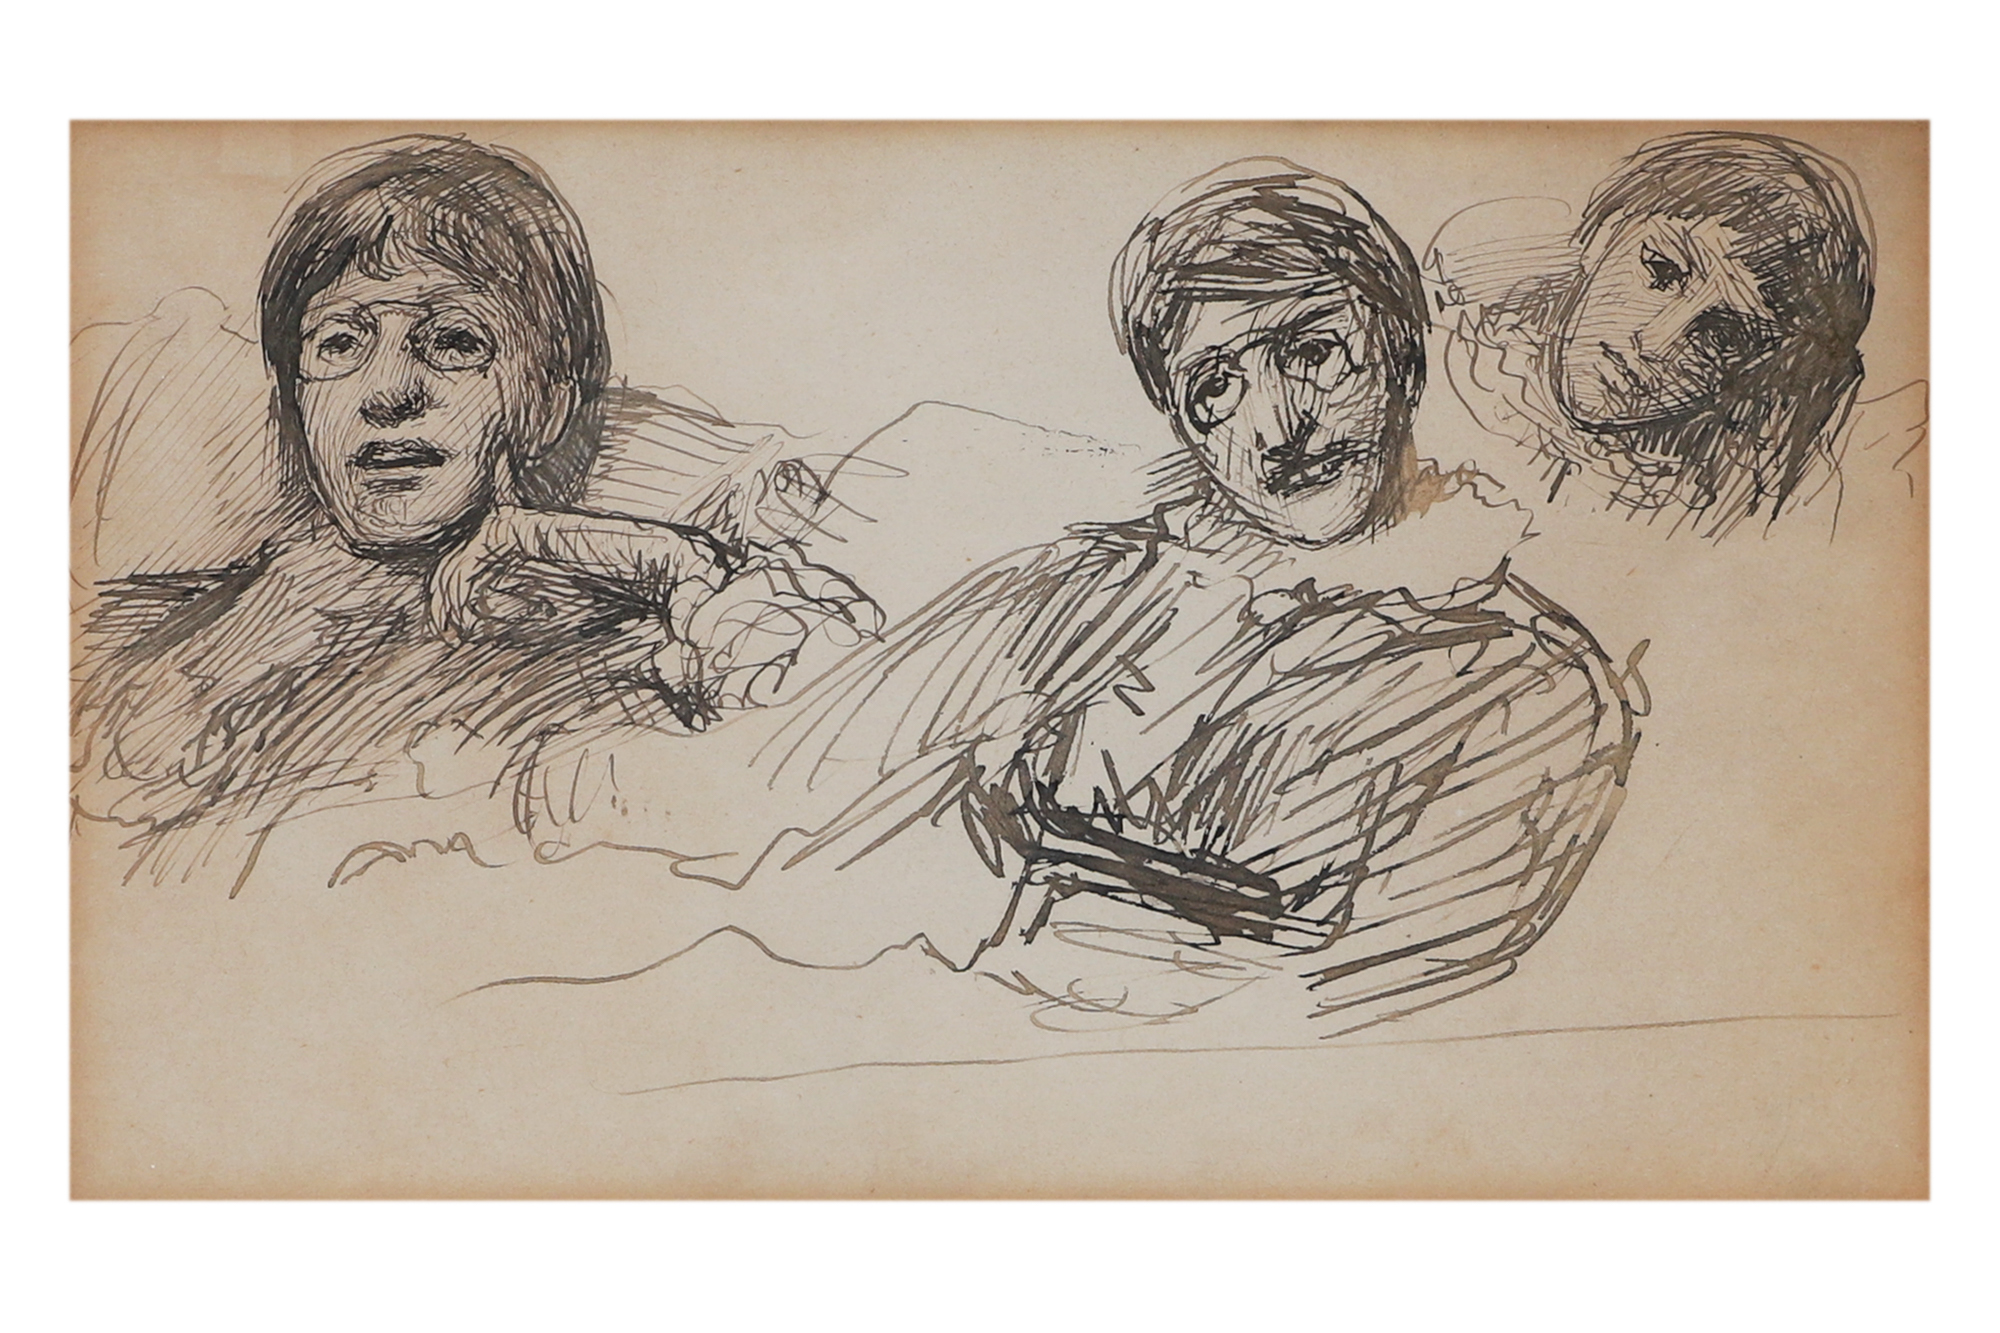 SARAH PURSER, RHA (Irl 1848 - 1943) "The Artist and her cousin" - Anna, ink drawing, labels verso;